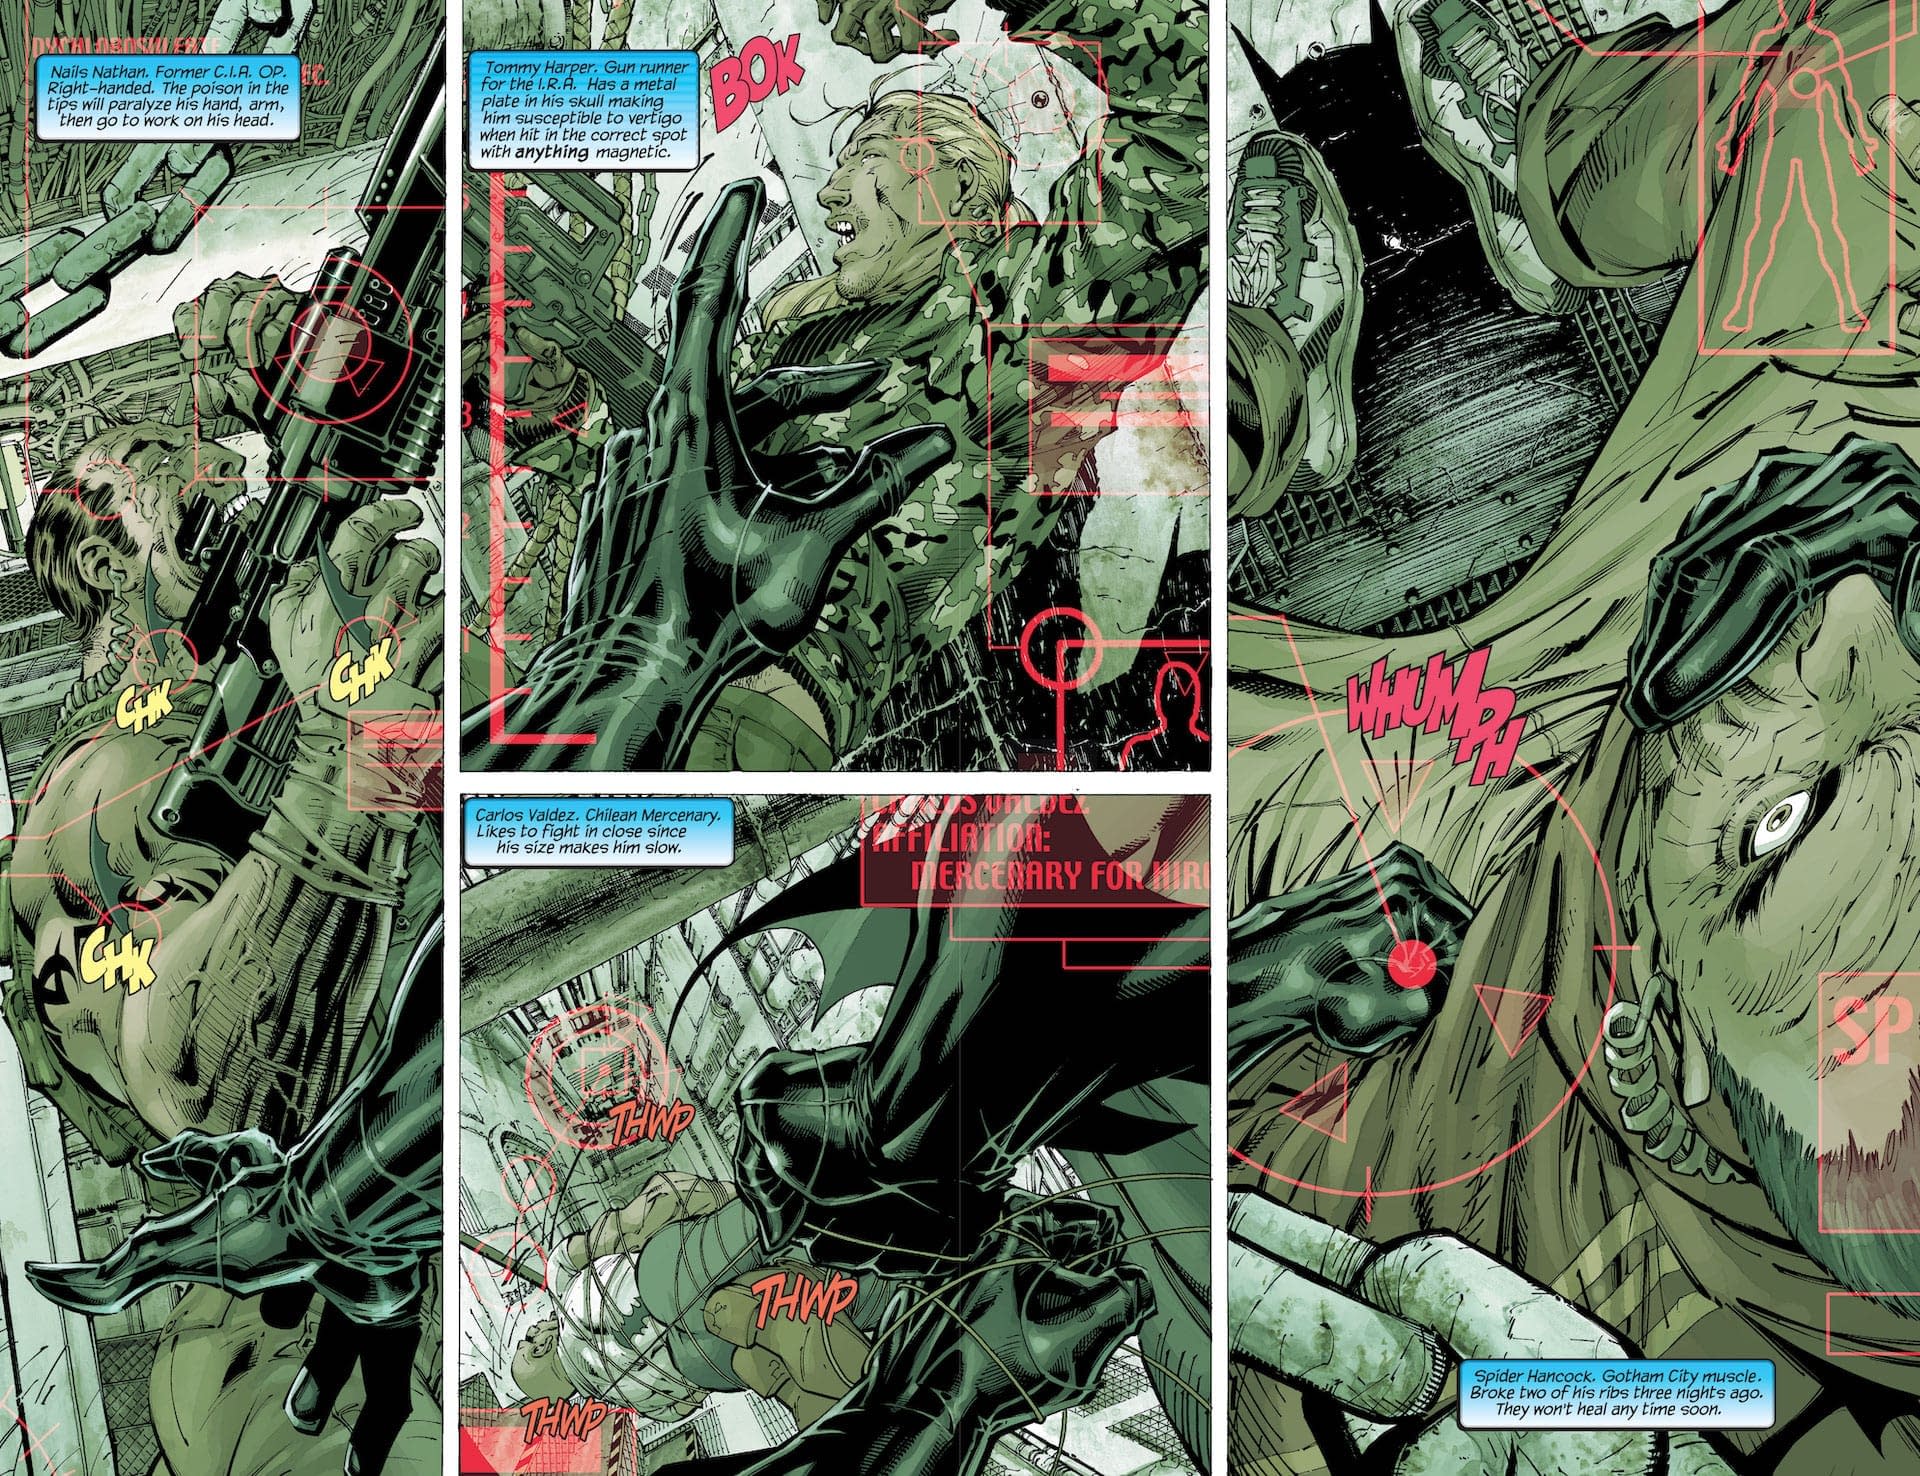 Batman Hush #1 Special Edition Preview: What's Old is New Again